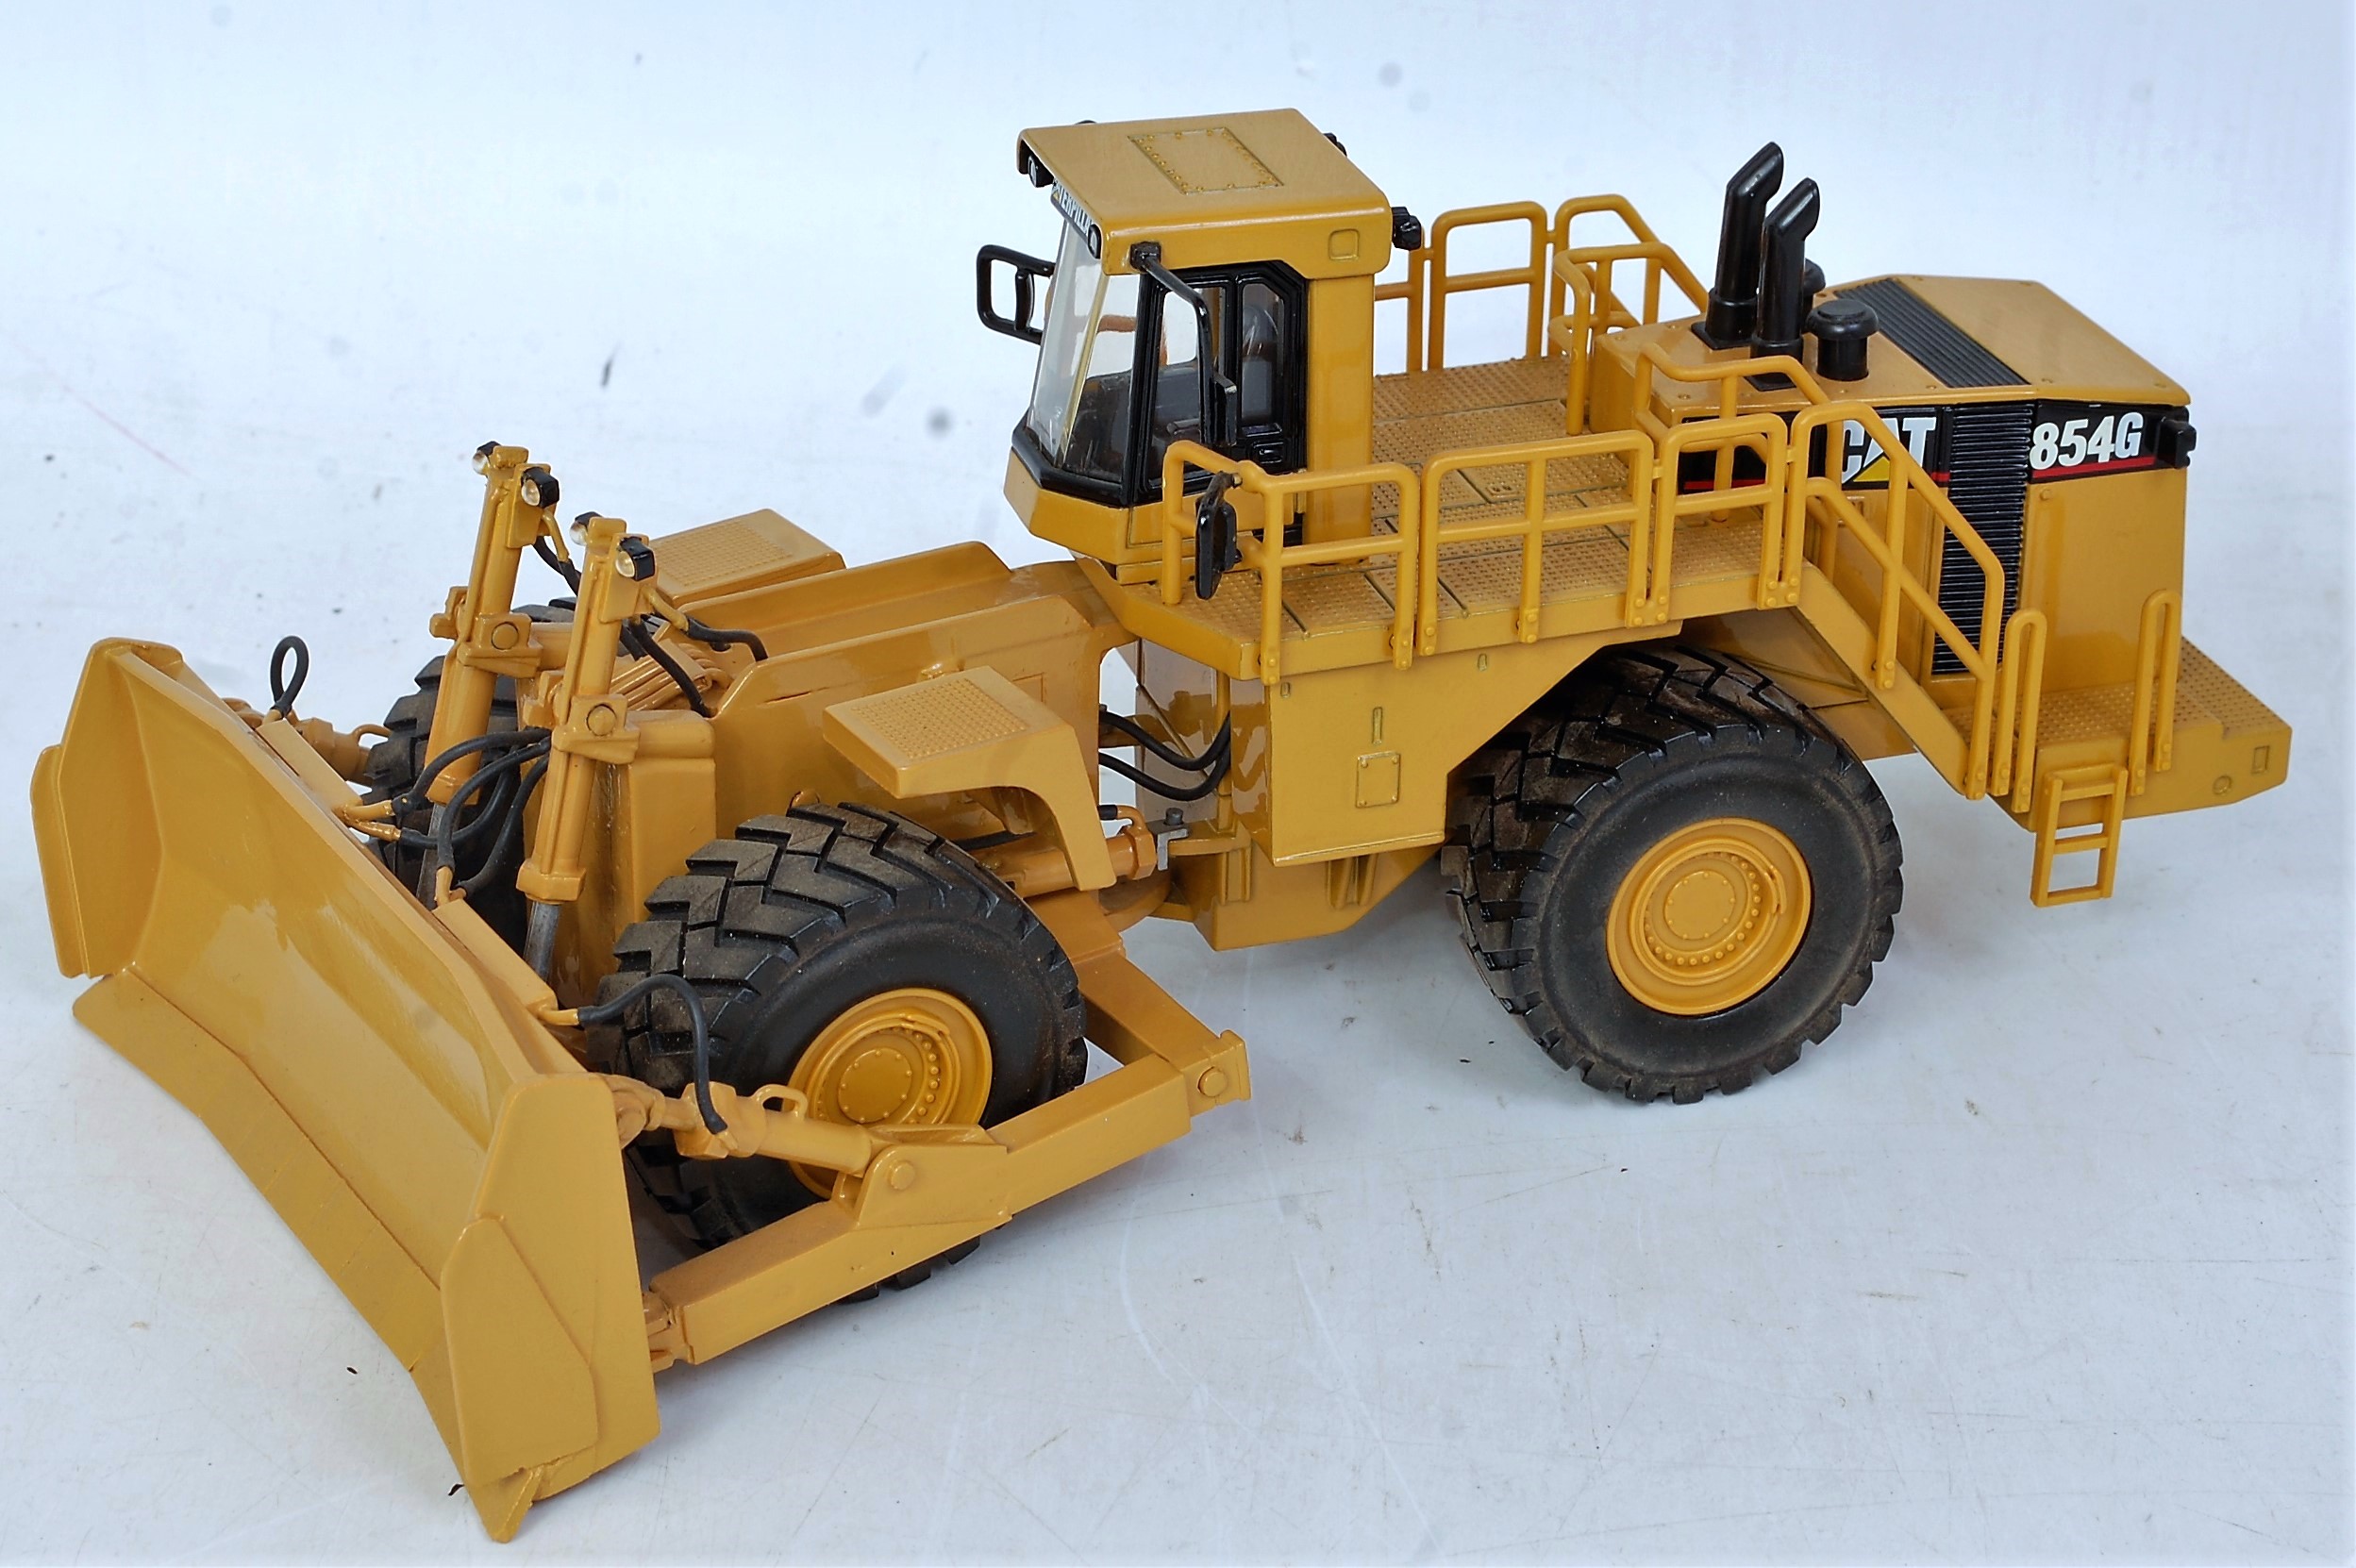 An OHS white metal and diecast model of a Caterpillar 854G wheeled bulldozer